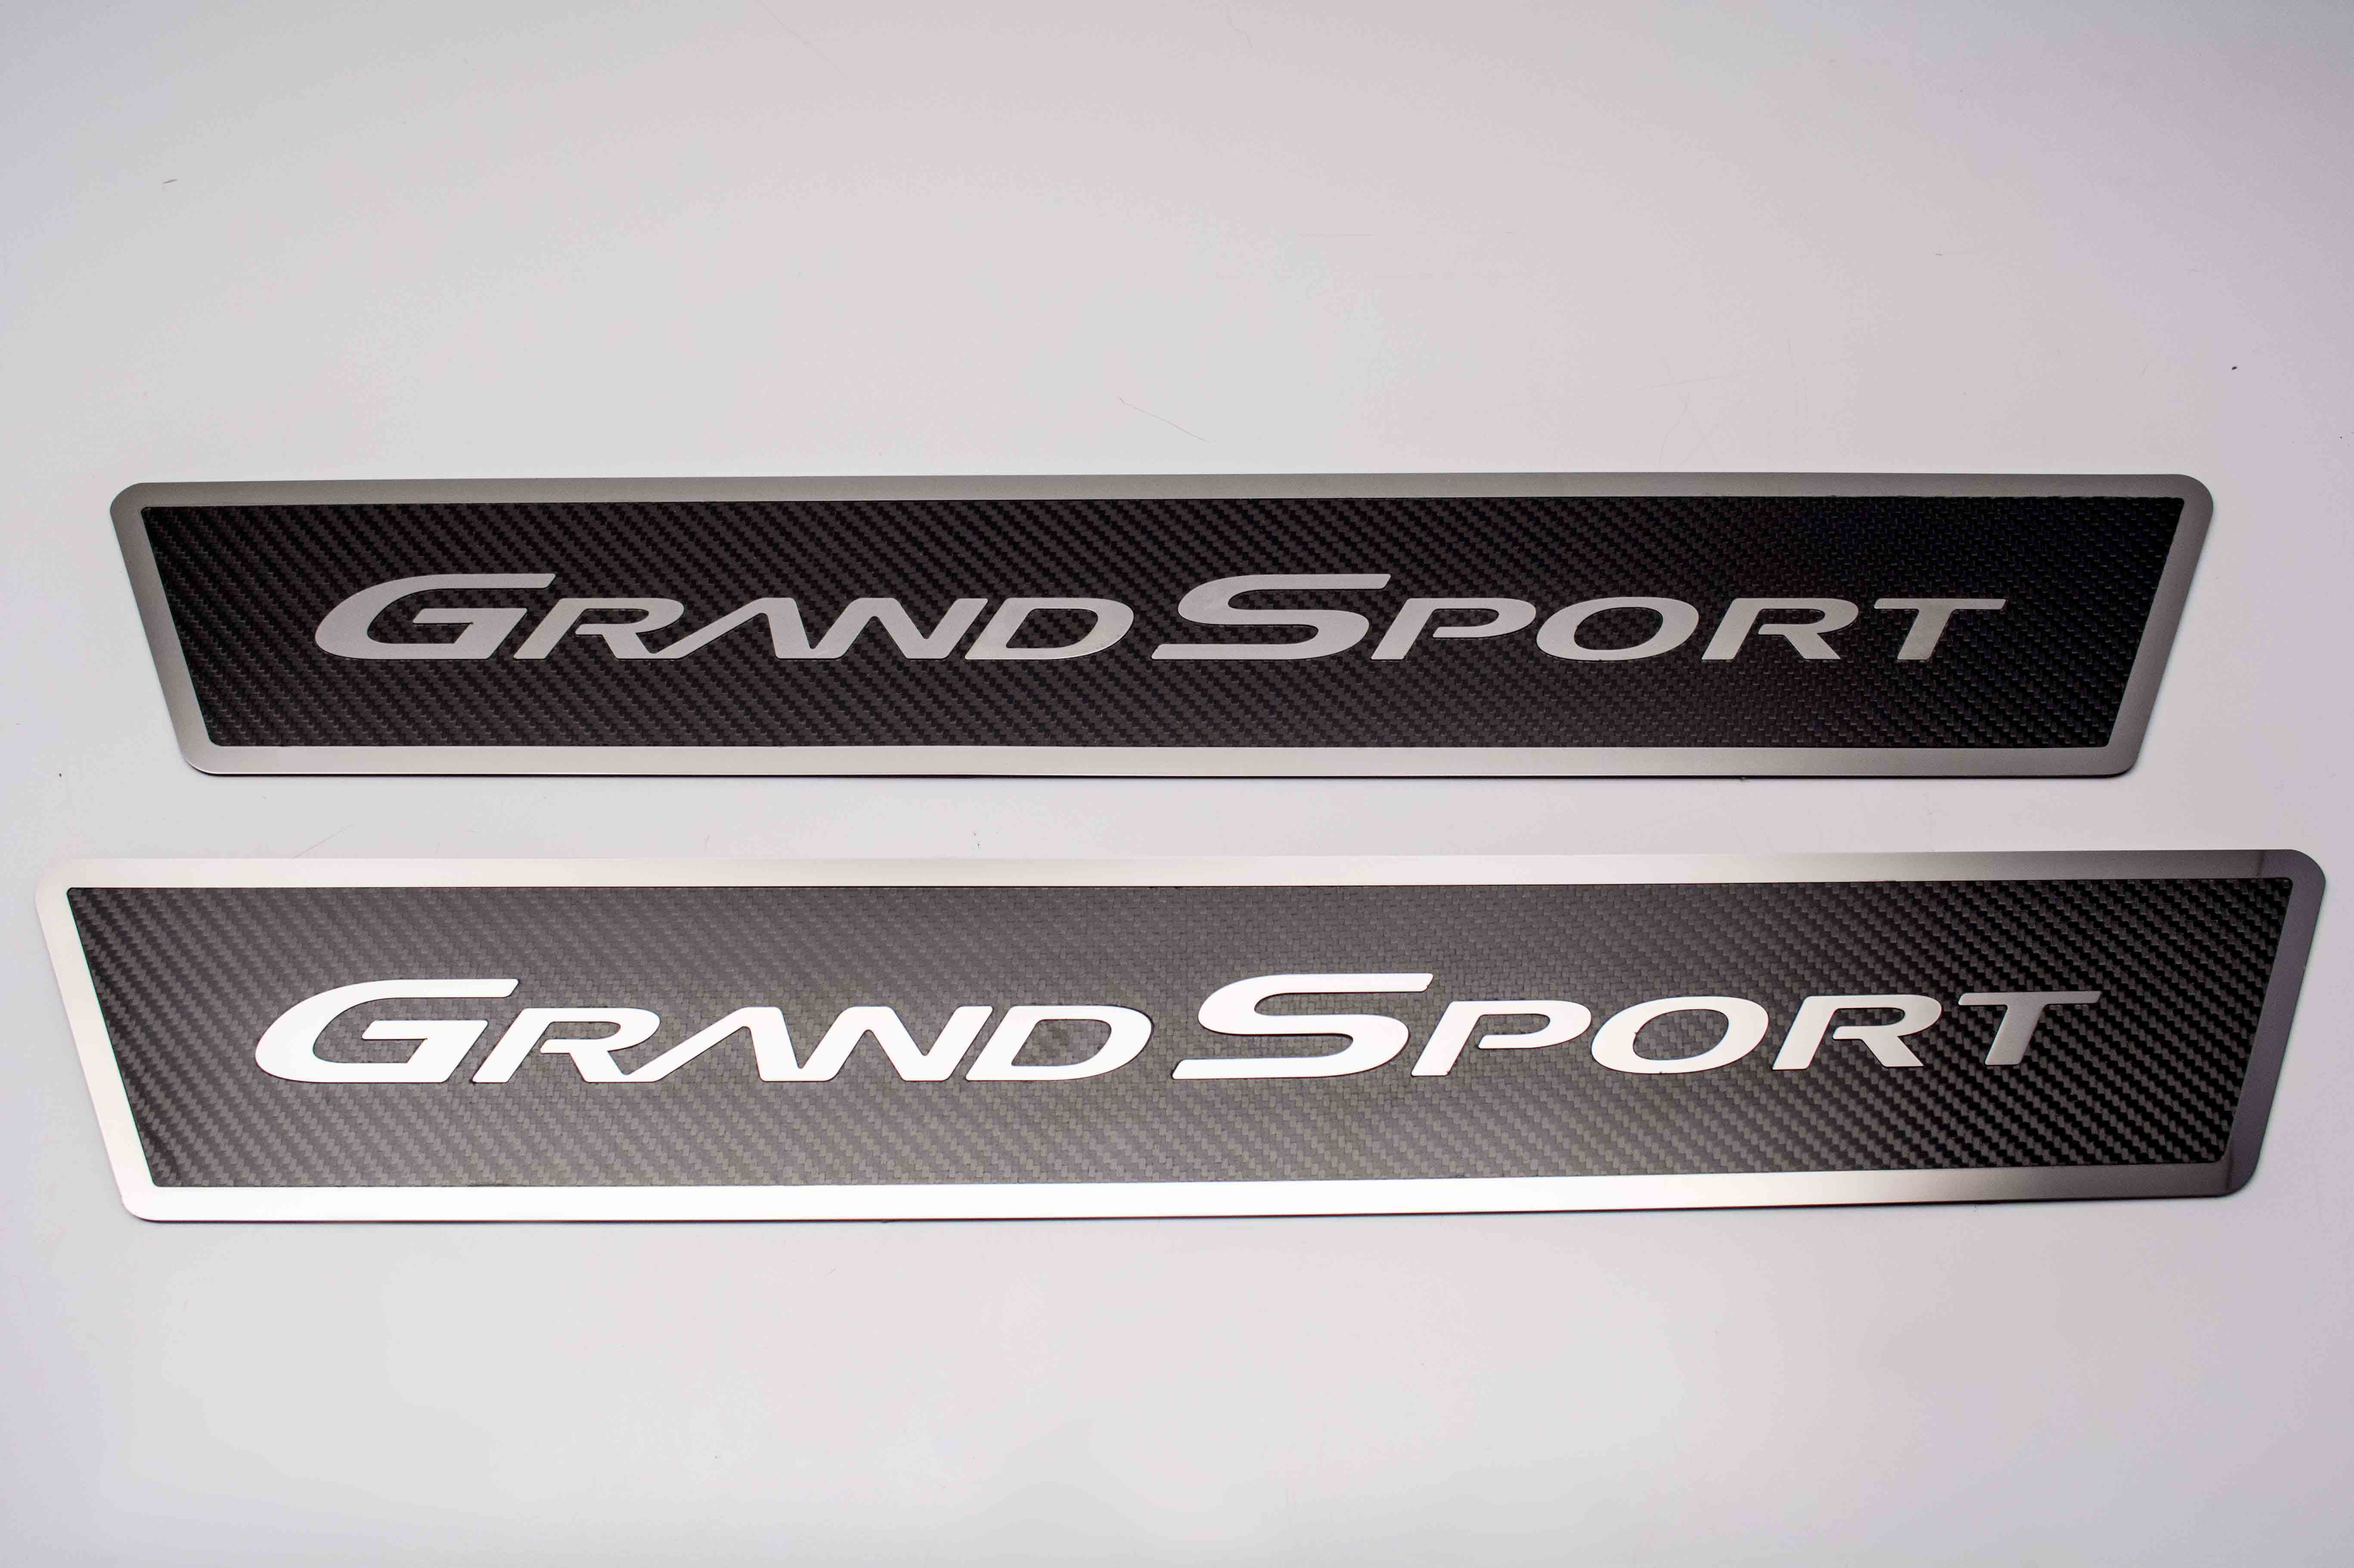 2009-2013 C6 Grand Sport Corvette, Outer Door Sills Carbon Fiber w/ Polished Stainless Steel  Inlay "Grand Sport", Stainless Ste